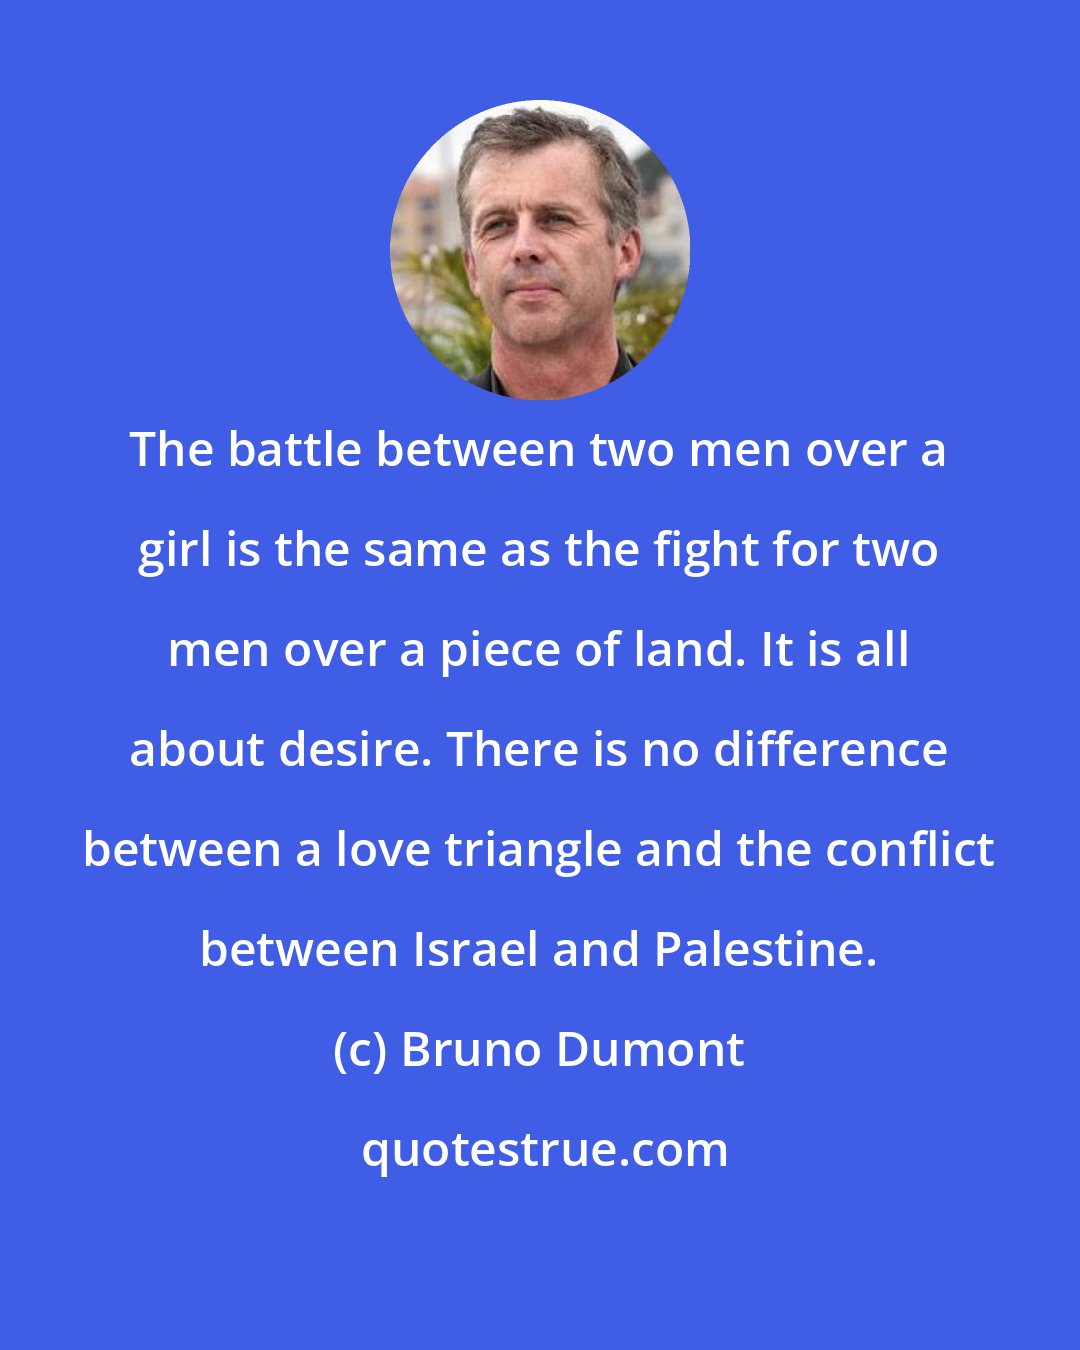 Bruno Dumont: The battle between two men over a girl is the same as the fight for two men over a piece of land. It is all about desire. There is no difference between a love triangle and the conflict between Israel and Palestine.